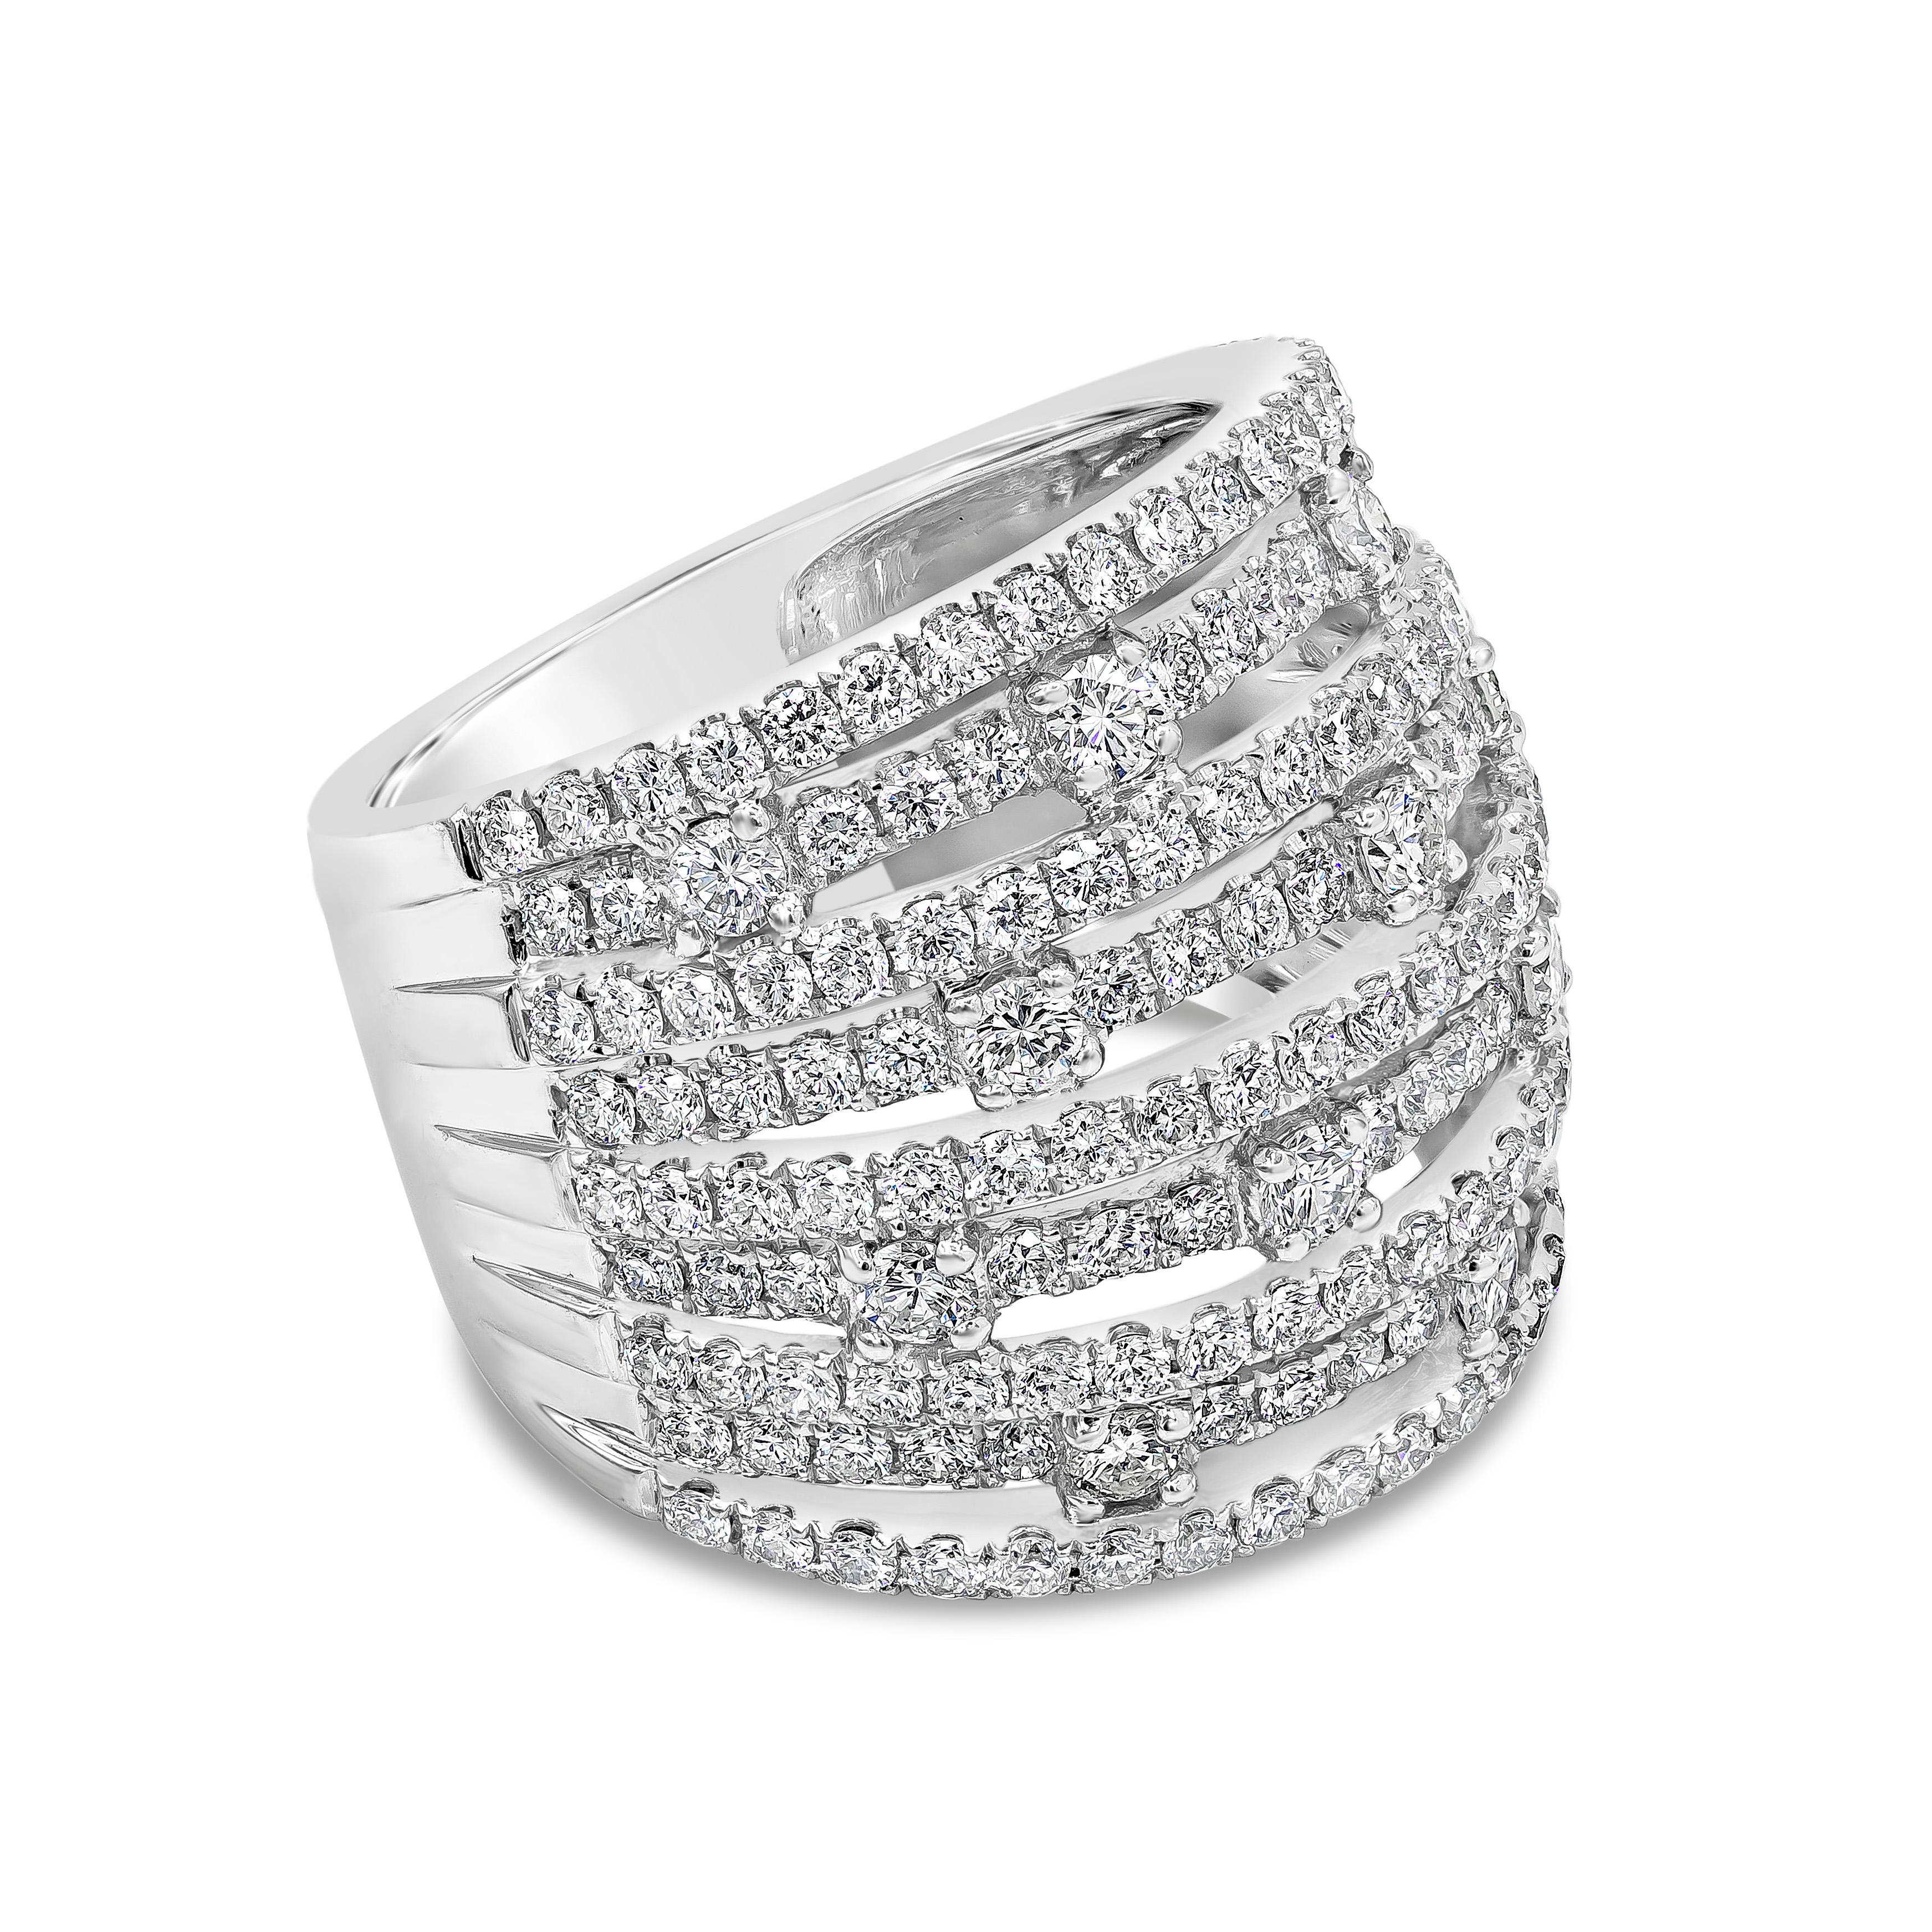 A brilliant and fashionable band ring showcasing nine rows of round brilliant diamonds weighing 2.71 carats total. Set in a open work setting. Made in 18K White Gold, Size 7 US and resizable upon request.

Roman Malakov is a custom house,